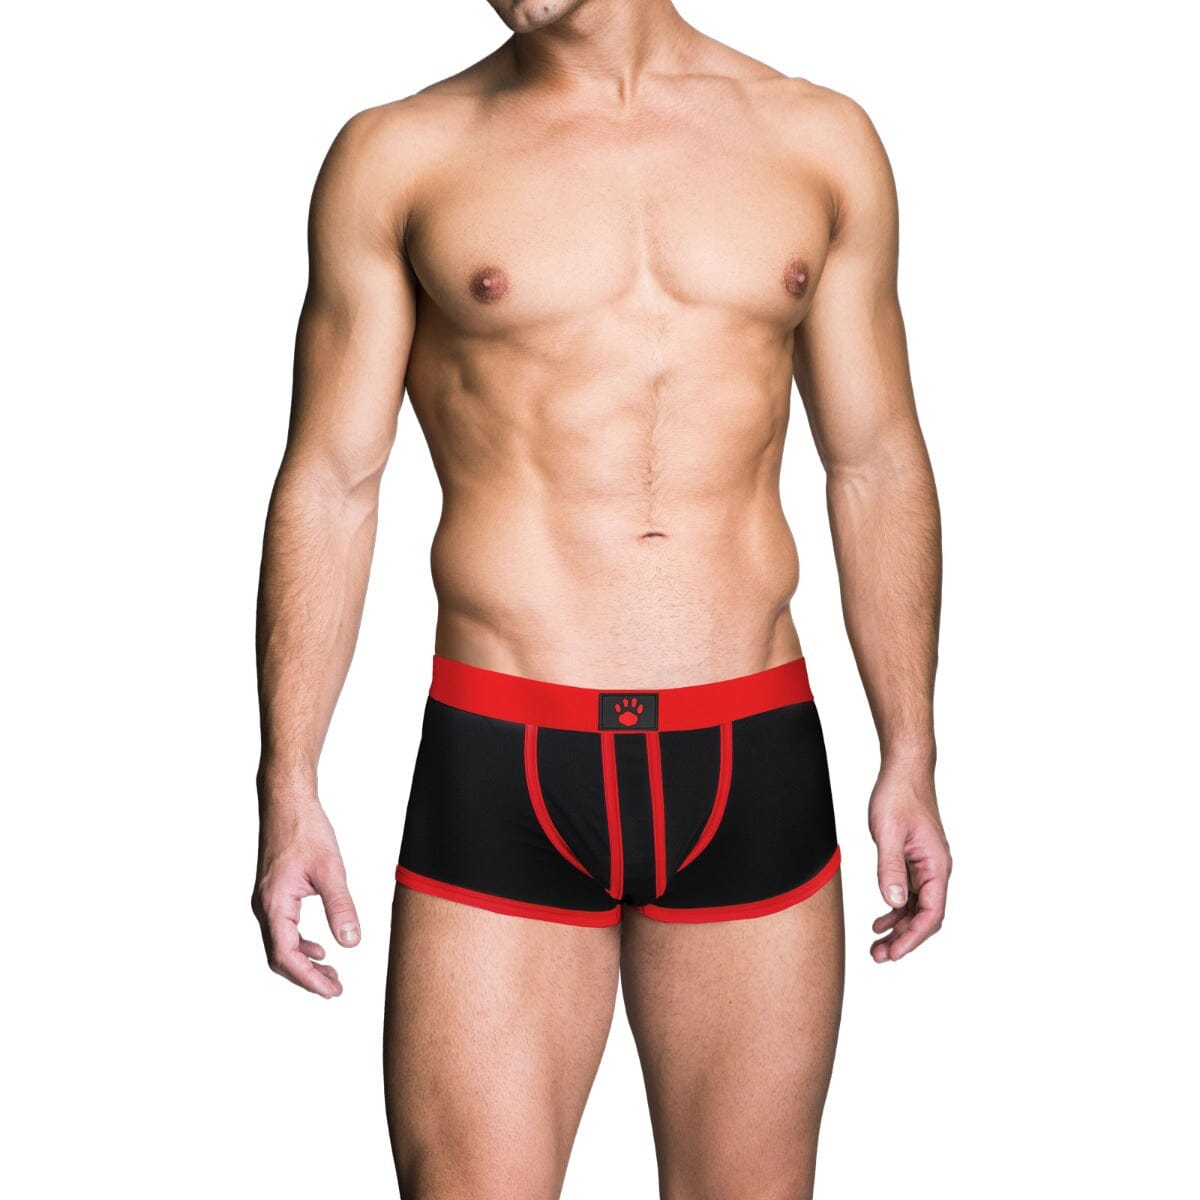 Prowler RED Ass-less Trunk Red Menswear Prowler RED (ABS PRO) 